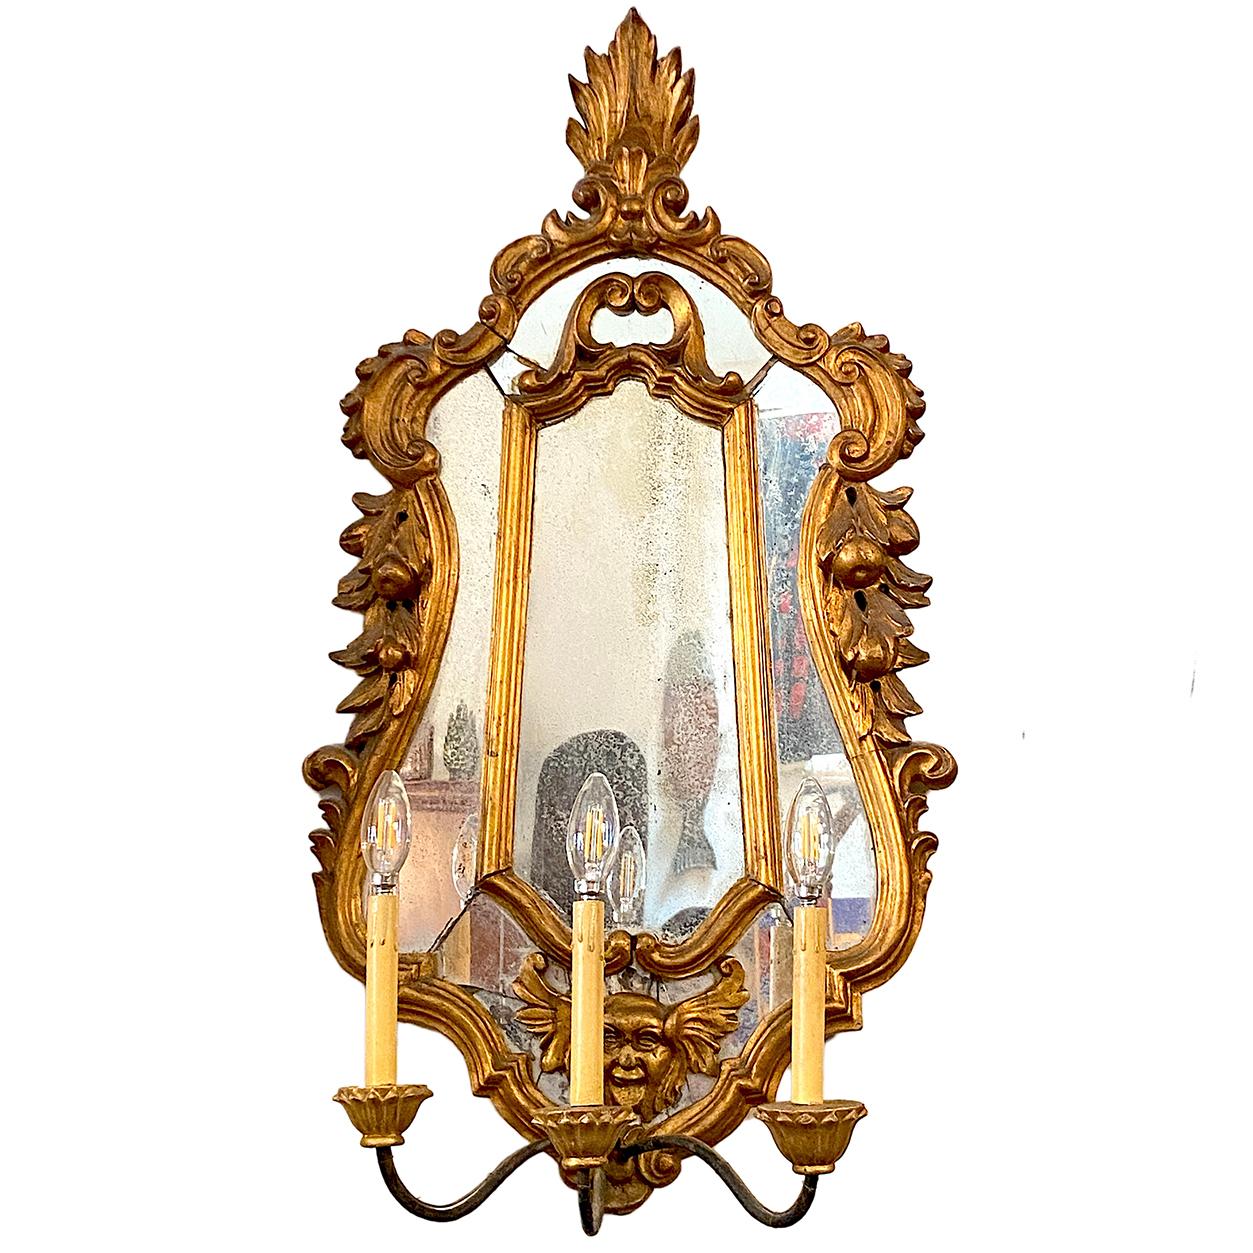 A pair of circa 19th century Italian gilt wood sconces with antique mirror backplate and three-light iron arms.

Measurements:
Height: 38